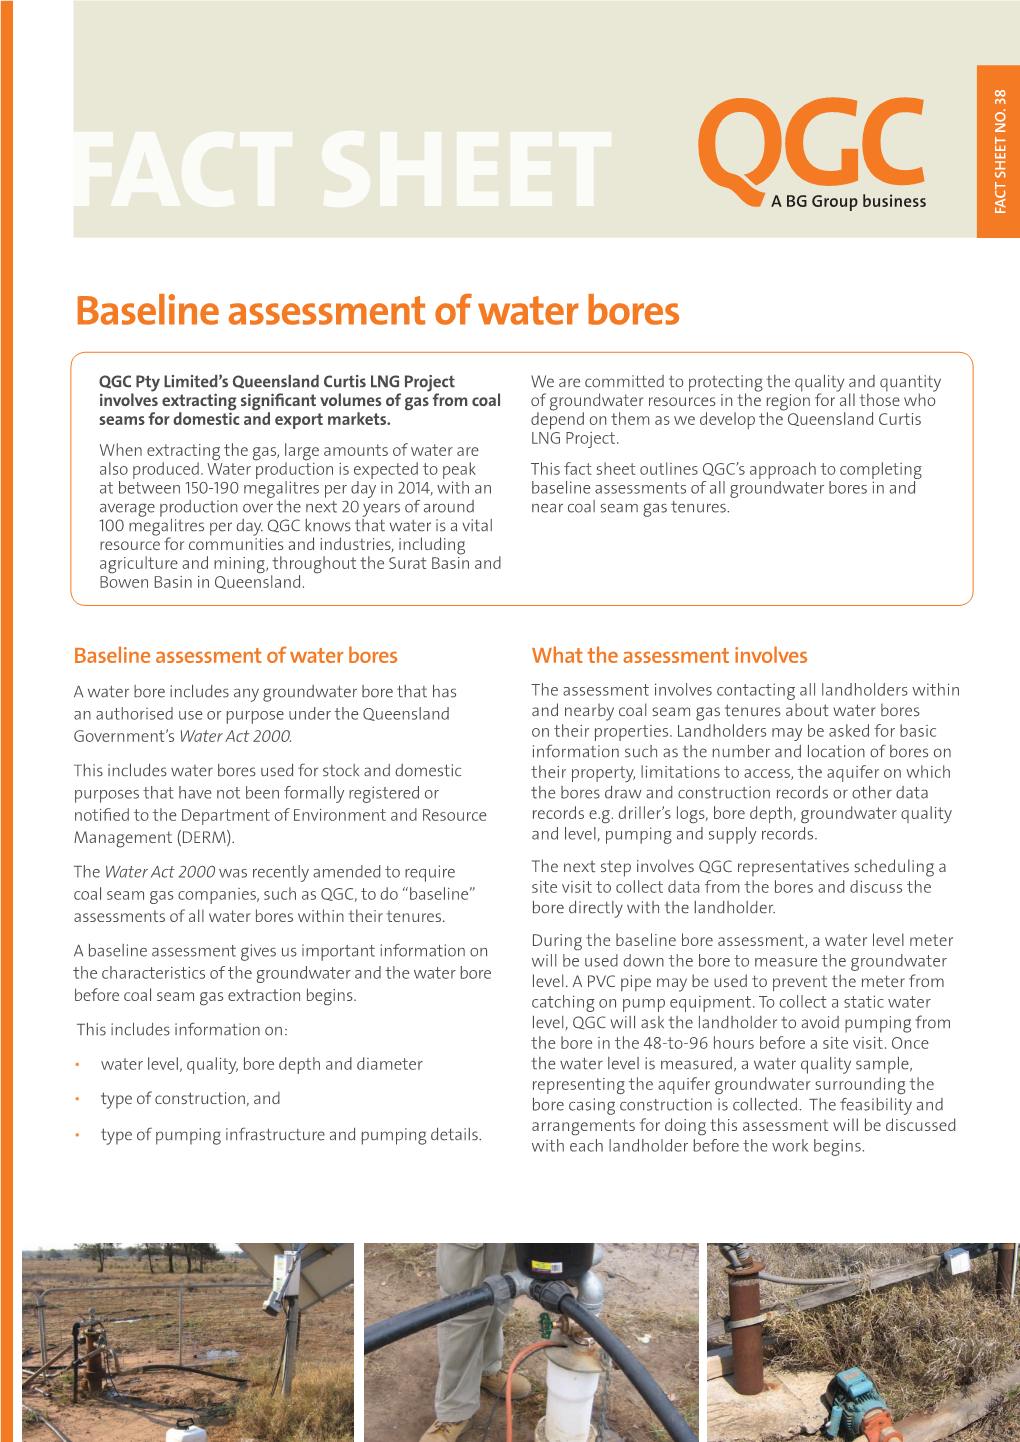 Baseline Assessment of Water Bores